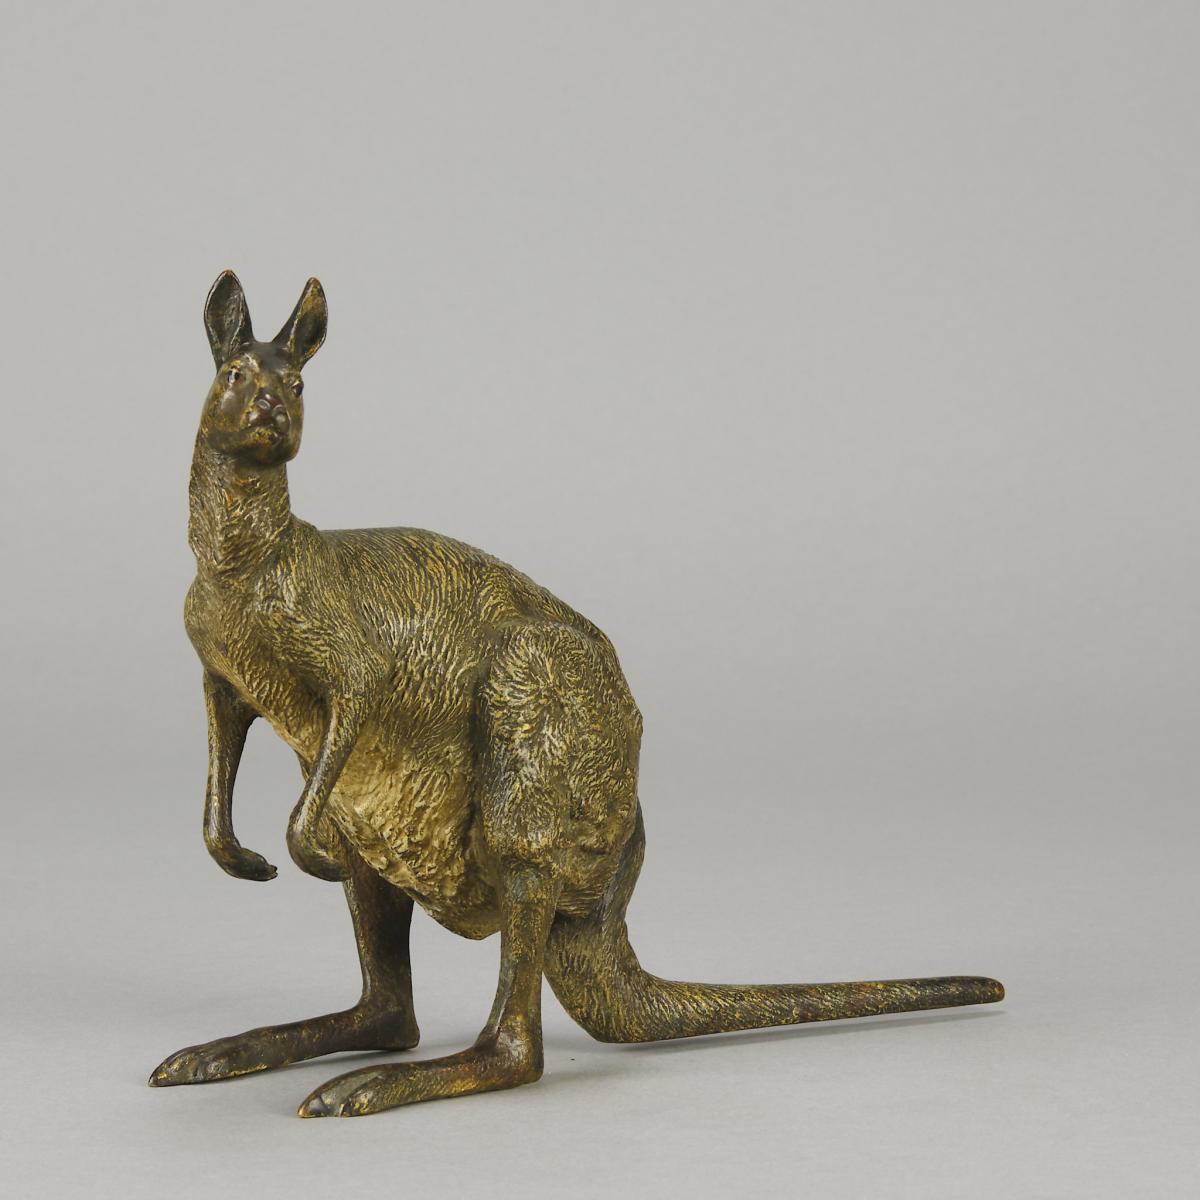 Early 20th Century Cold-Painted Austrian Bronze entitled "Kangaroo" by Franz Bergman